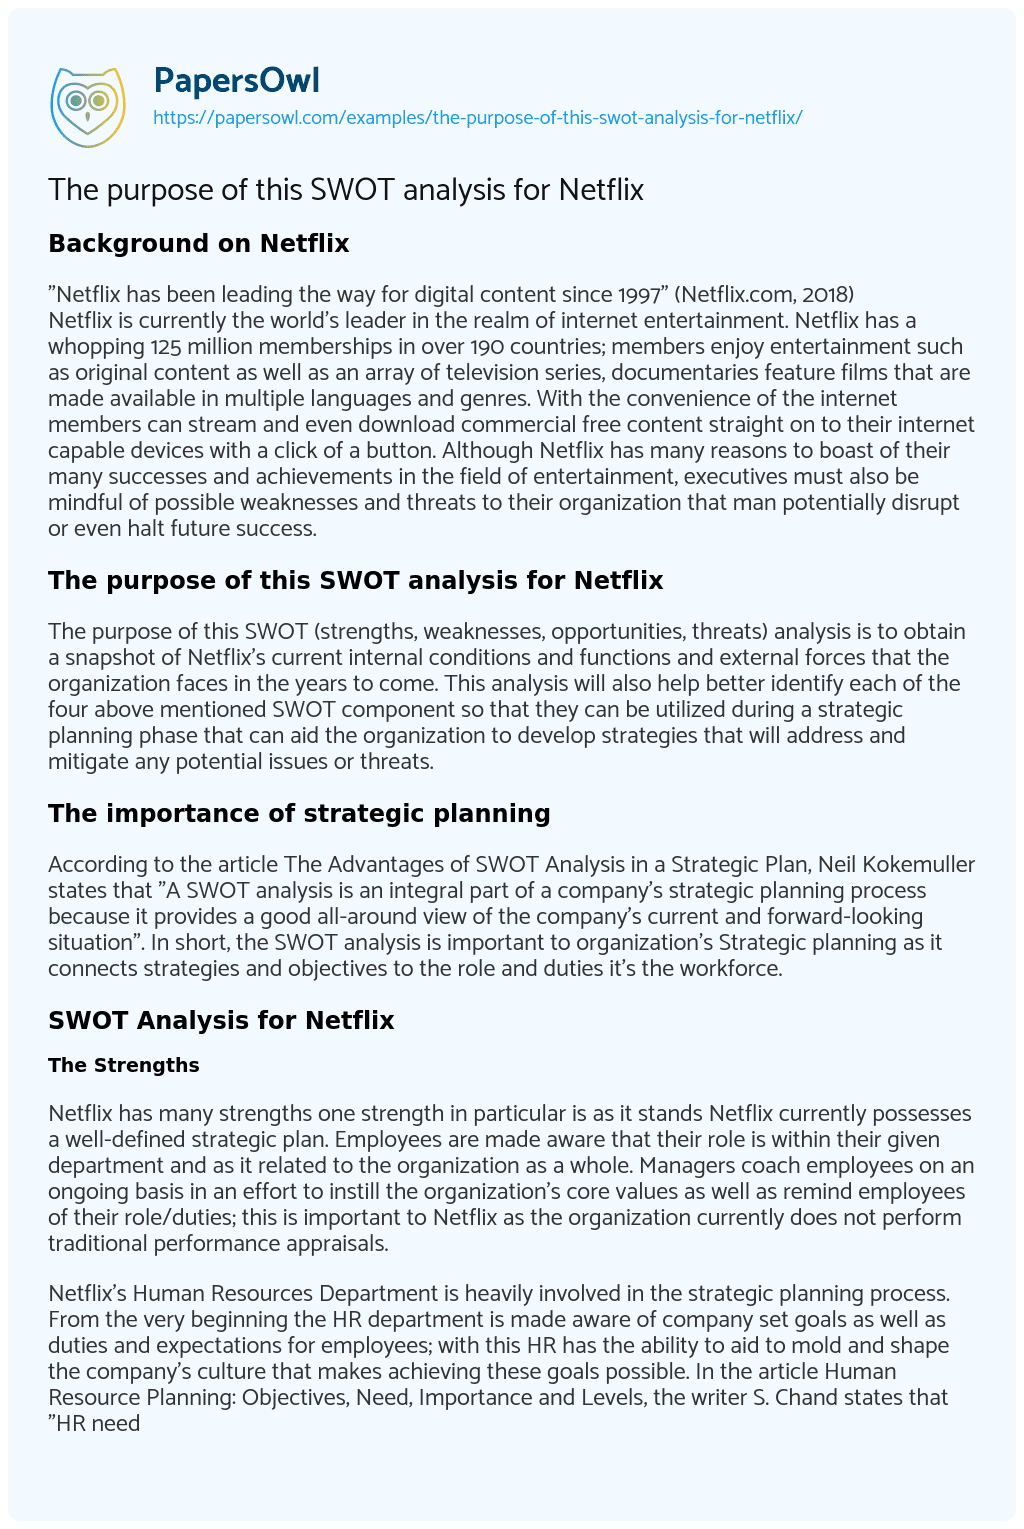 Essay on The Purpose of this SWOT Analysis for Netflix